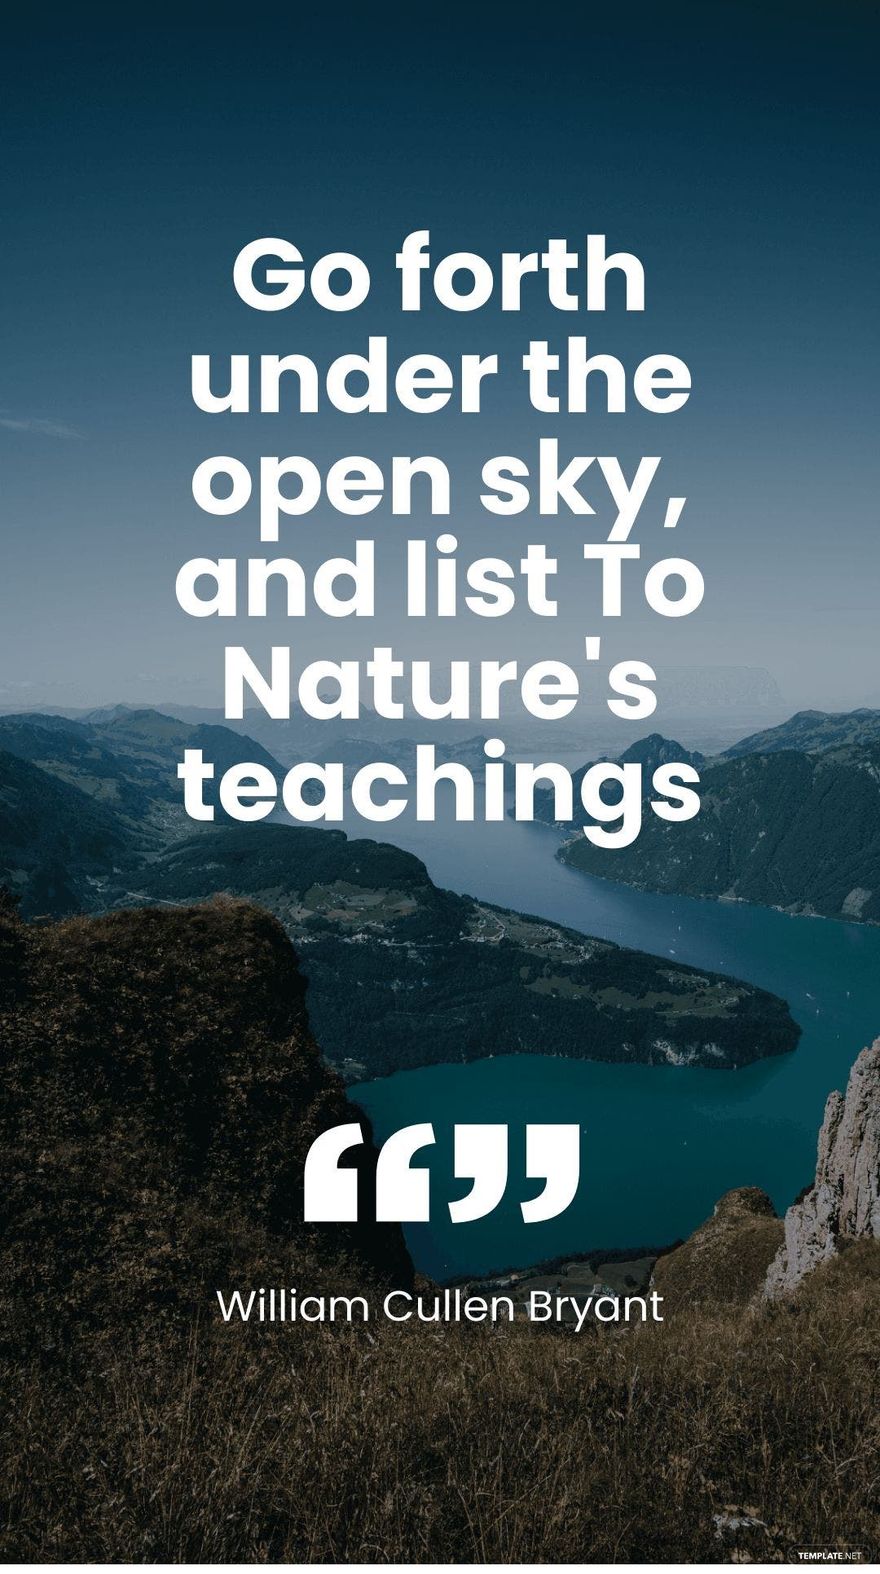 William Cullen Bryant - Go forth under the open sky, and list To Nature's teachings.